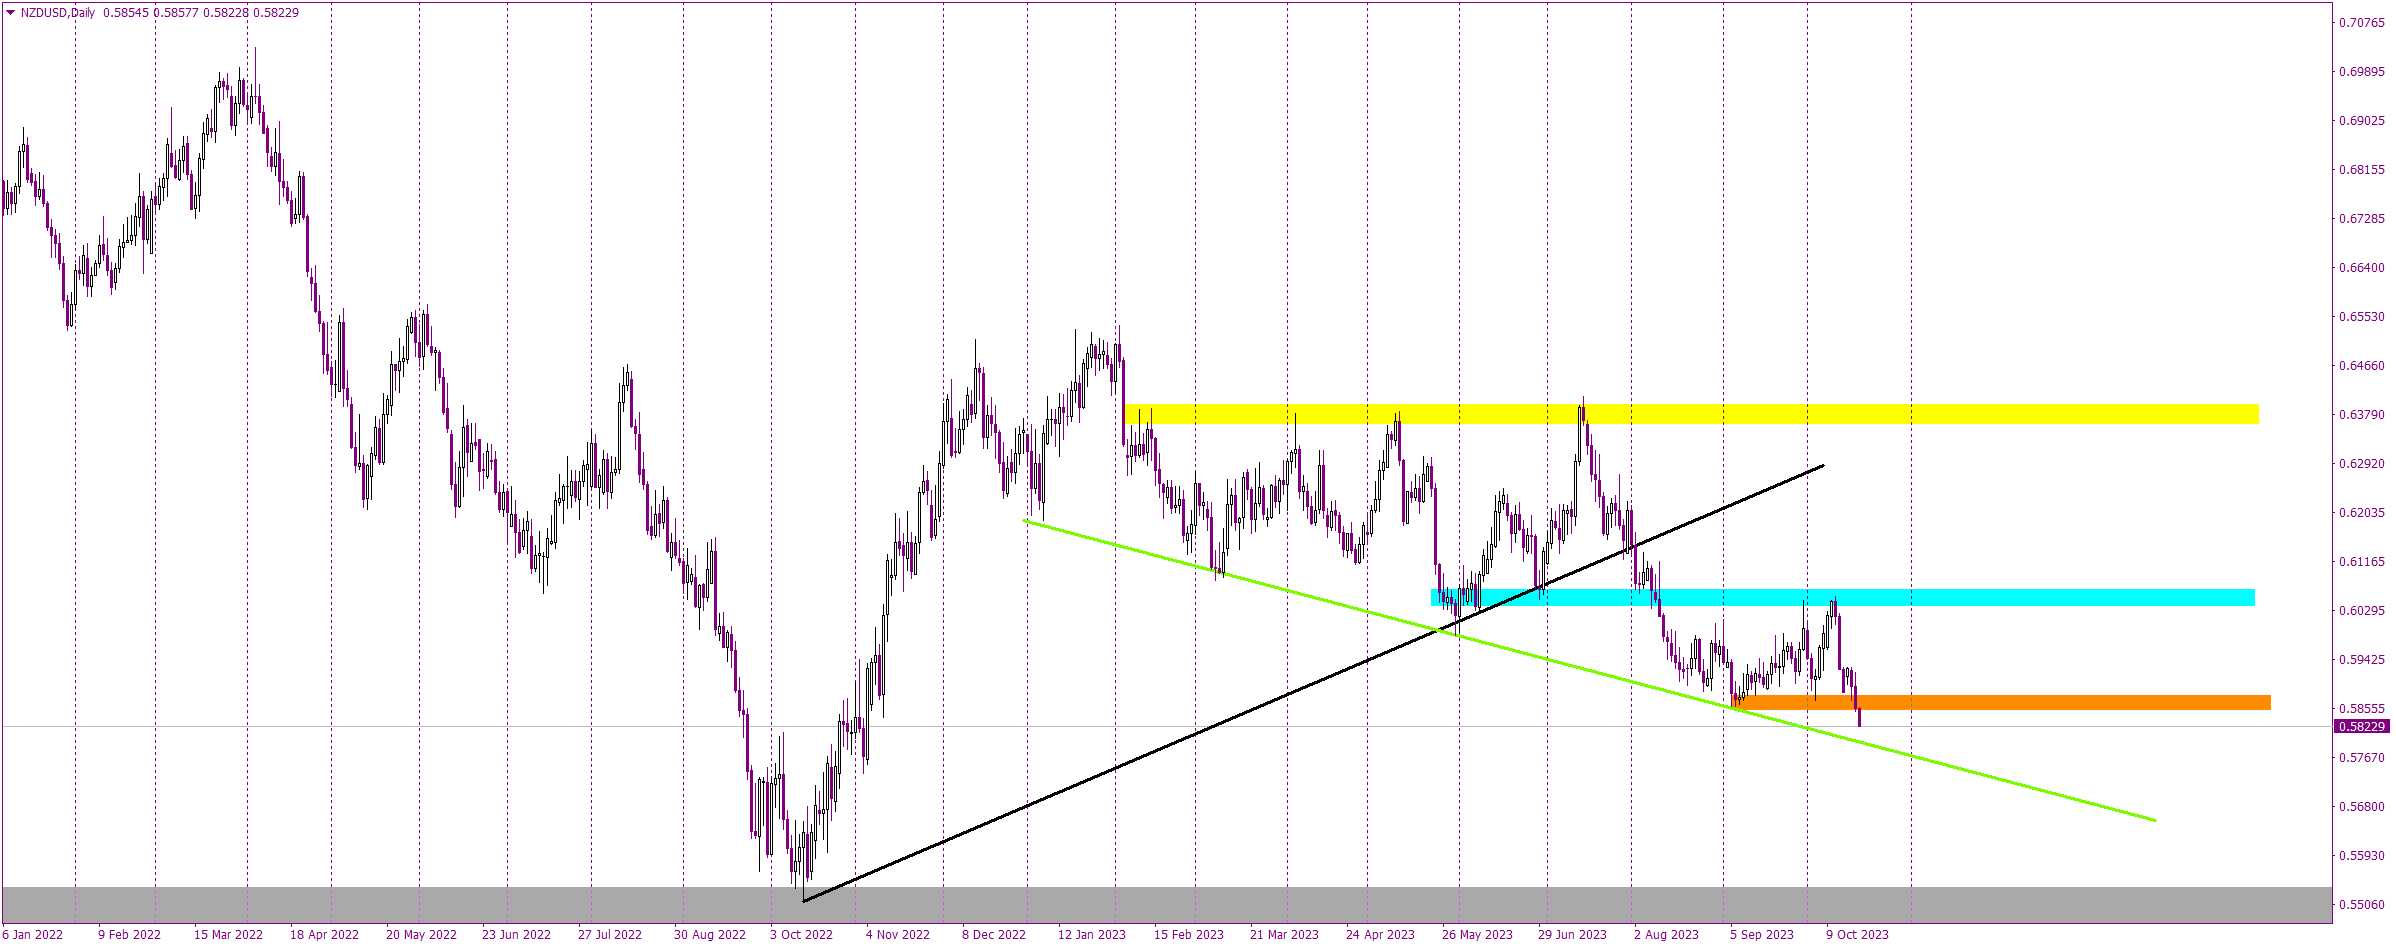 Will the NZDUSD Dance Lead to the March 2020 Lows?